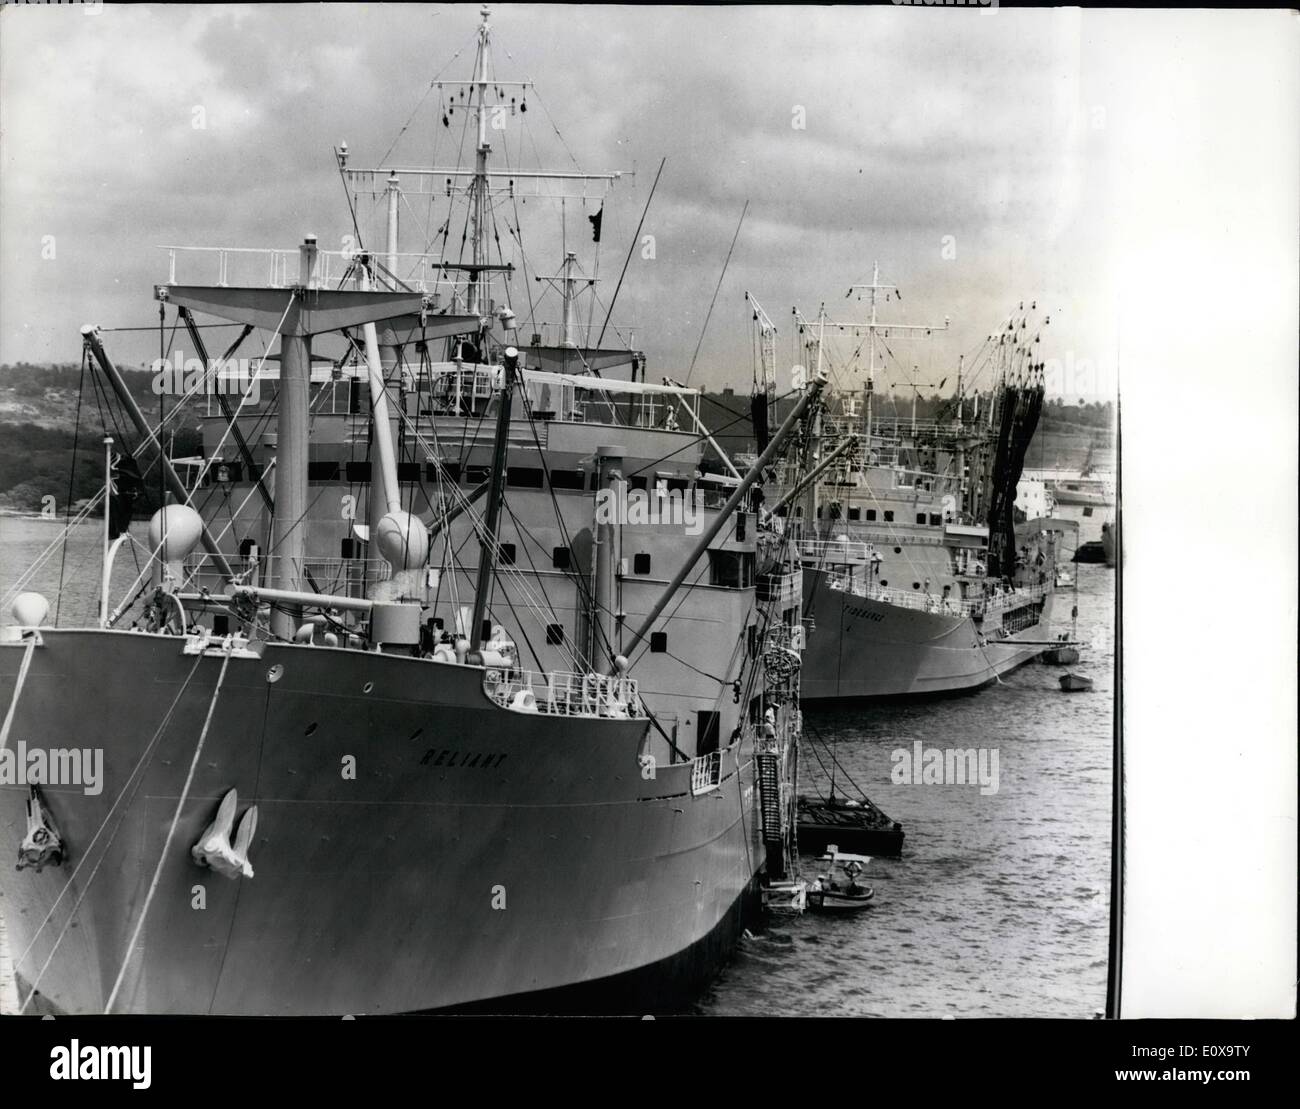 Oct. 10, 1965 - British Naval vessels in Mombasa. Three British aircraft carriers and destroyers arrived recently in Mombasa. According to reports emanating from Nairobi, the arrival of these ships are subject to the present crisis in Desirae. Photo shows Pictured in Mombasa are the ''Reliant'' a fleet supply ship, with behind the ''Tindesurse'' a fleet replenishment tanker. Stock Photo